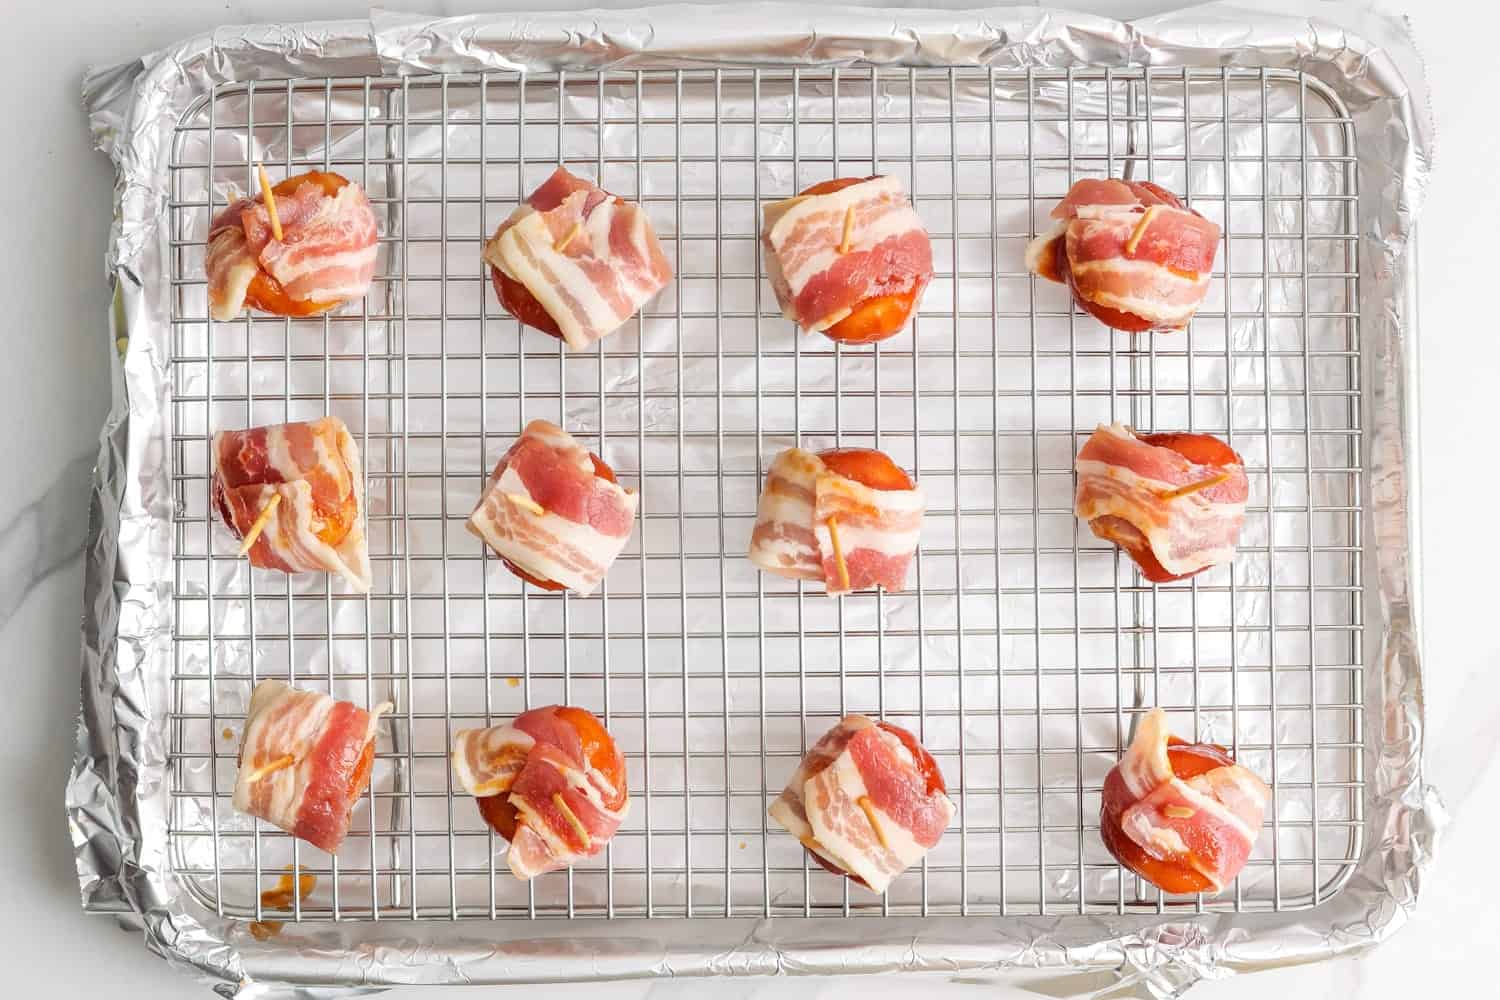 12 bacon wrapped water chestnuts on a wire rack over a foil lined sheet pan. 